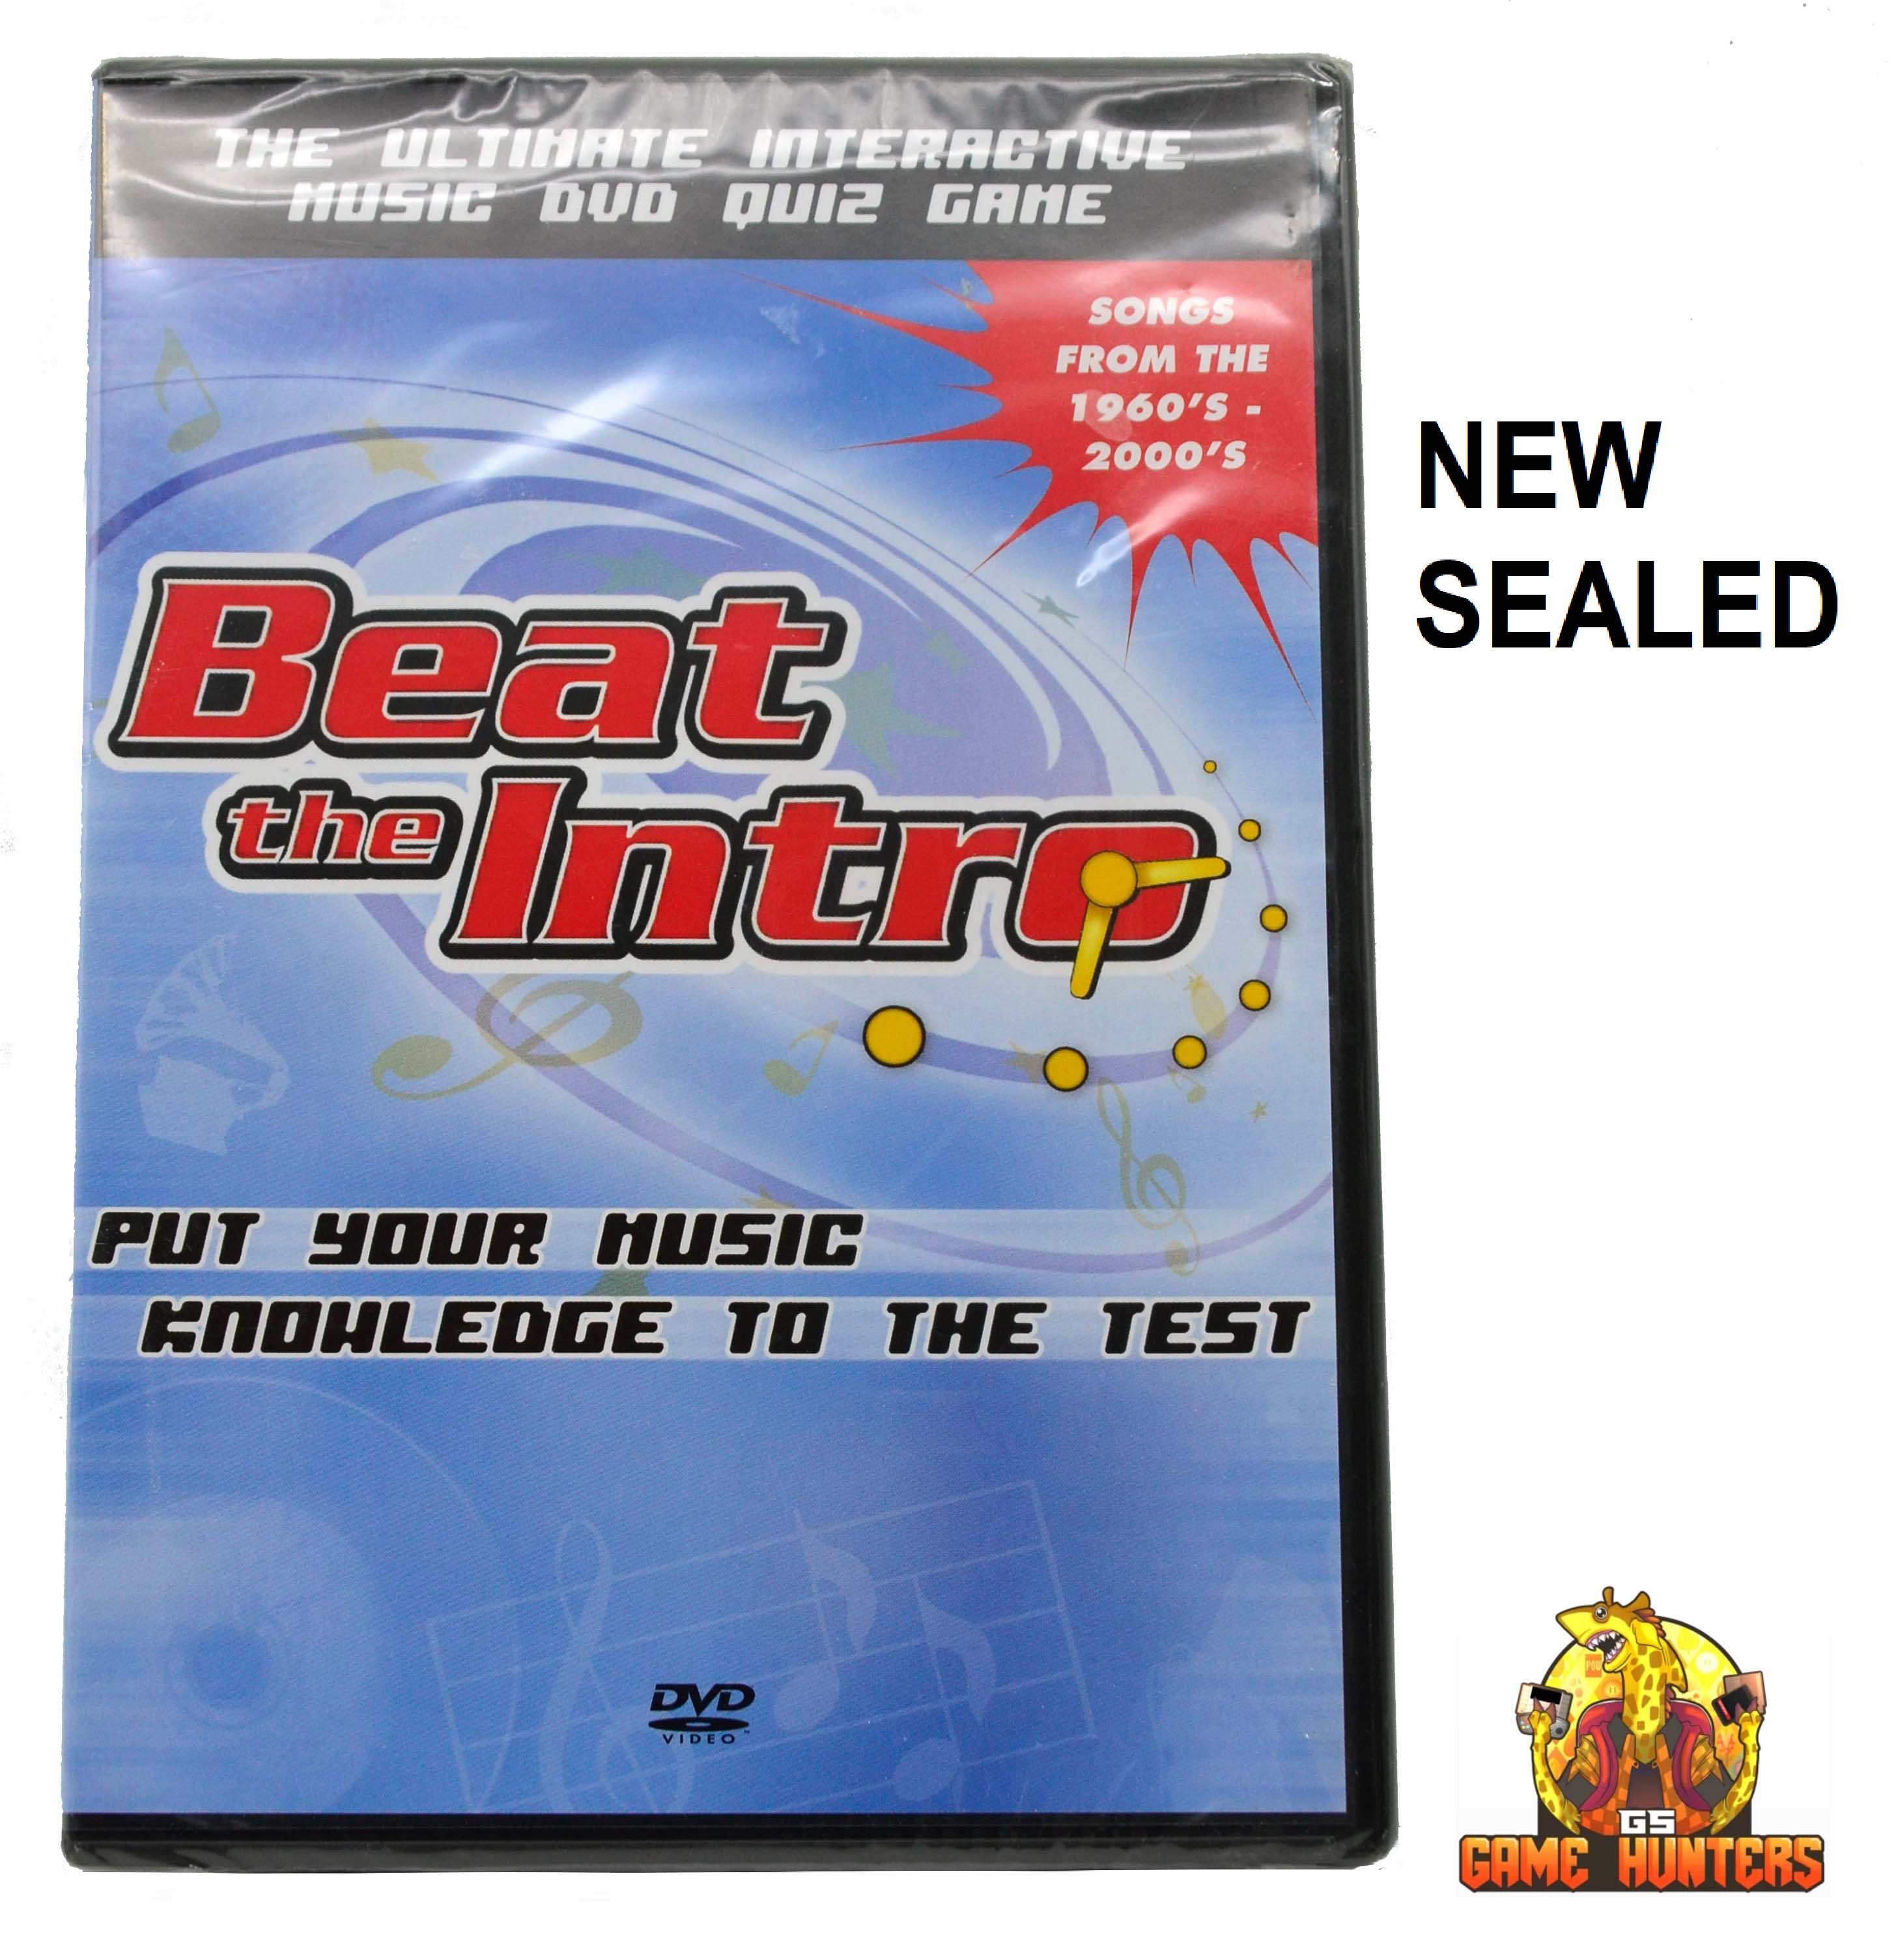 Beat The Intro Case (New sealed).jpg  by GSGAMEHUNTERS